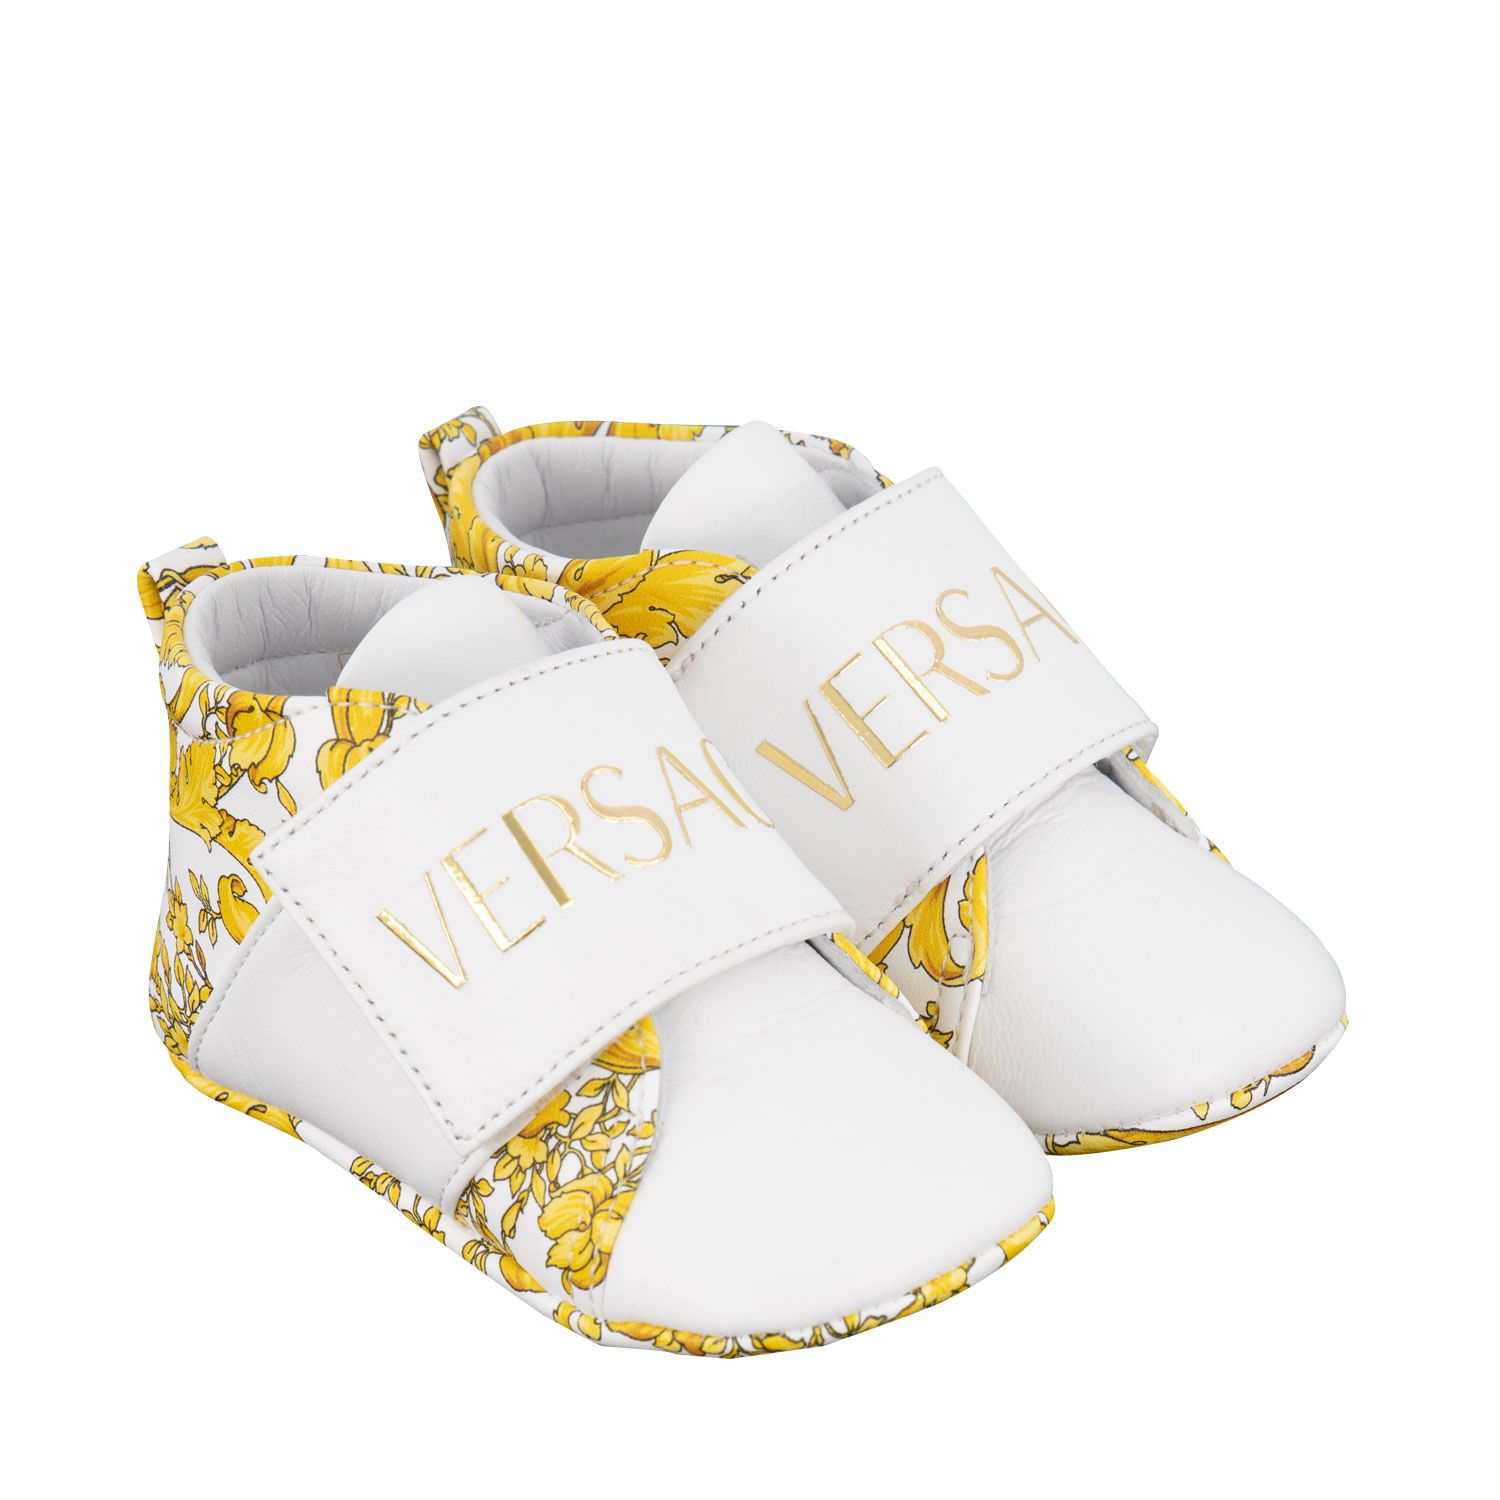 Versace 1000368 Unisex White at Coccinelle